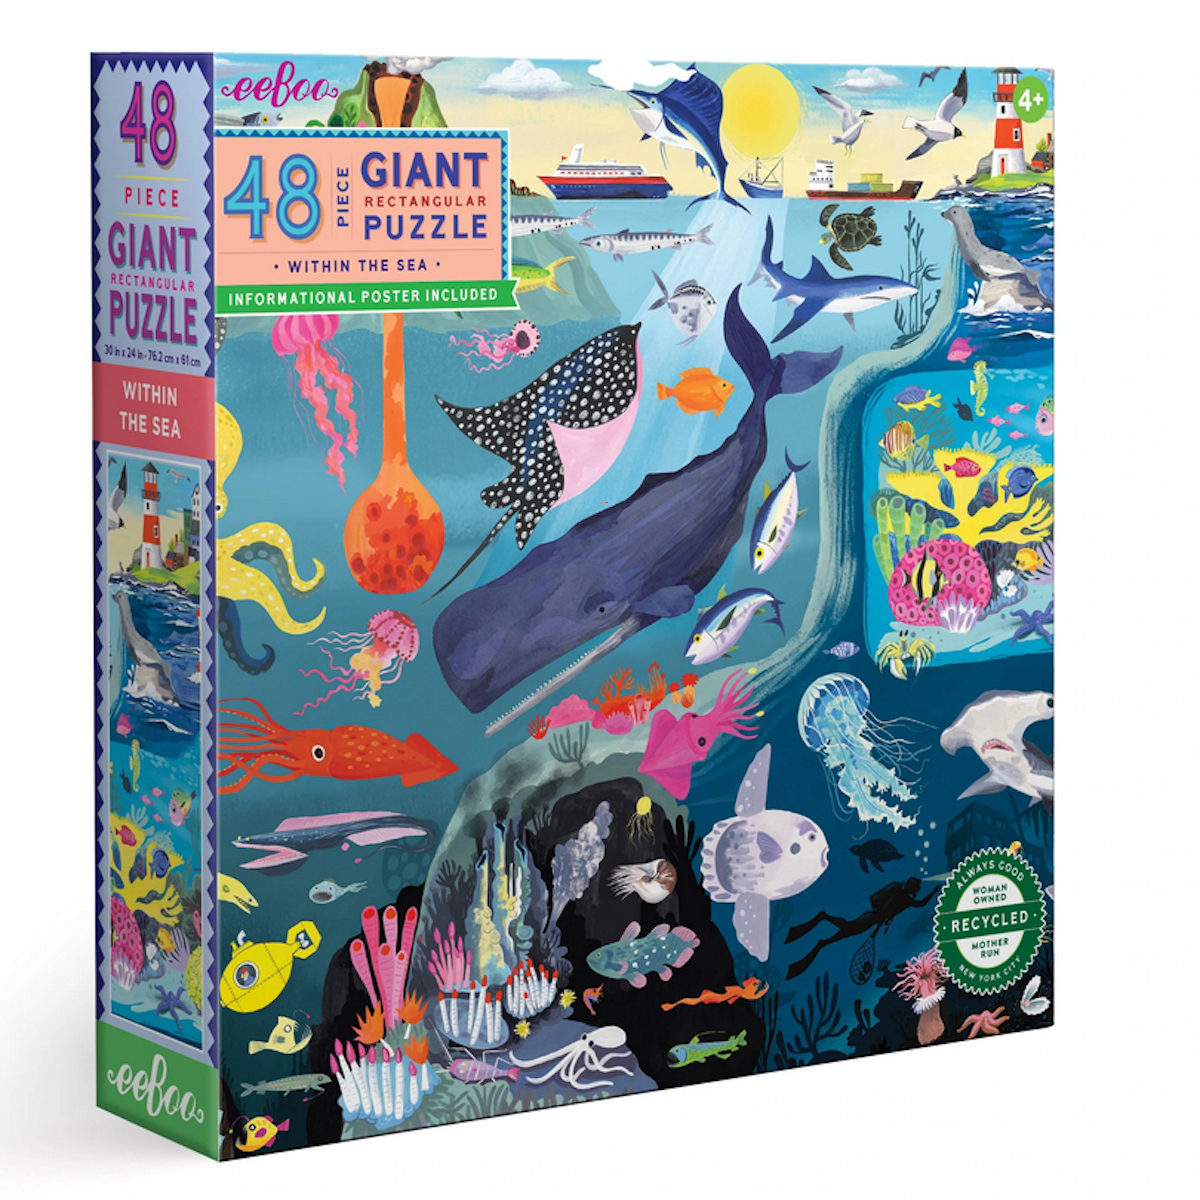 Within the Sea eeBoo Puzzle 48pcs